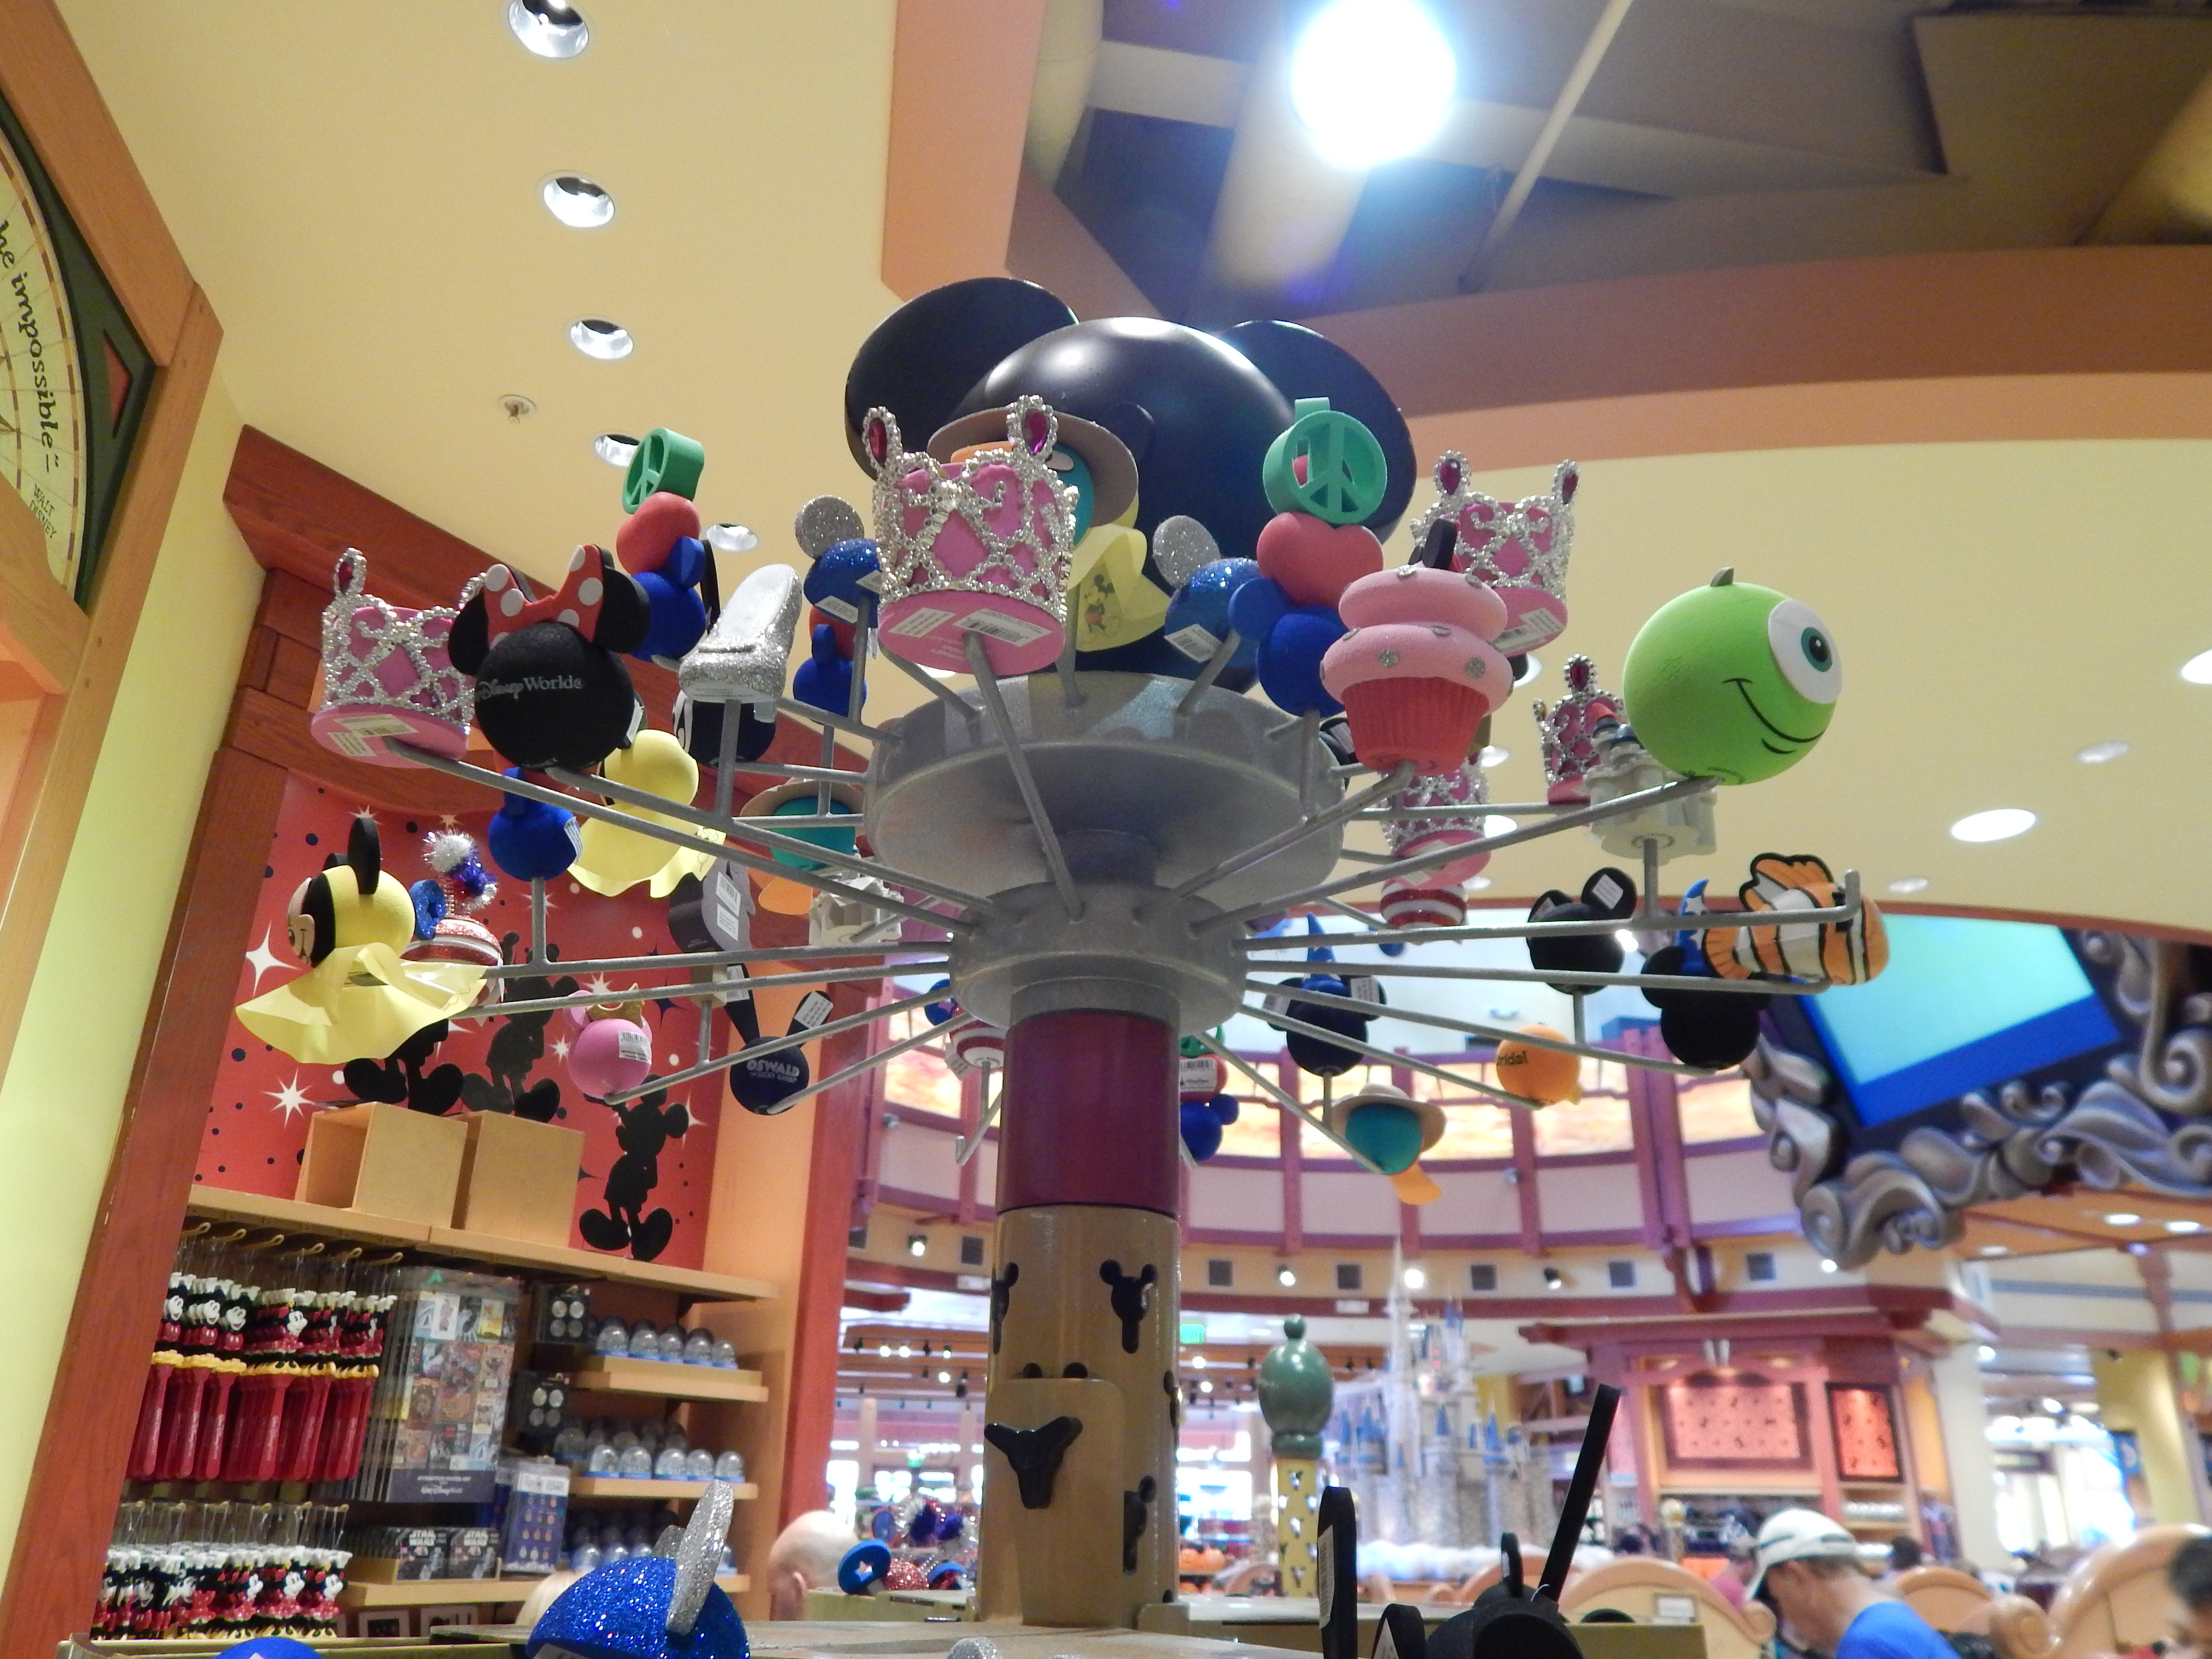 Top 5 Ways To Use Disney Antenna Toppers!